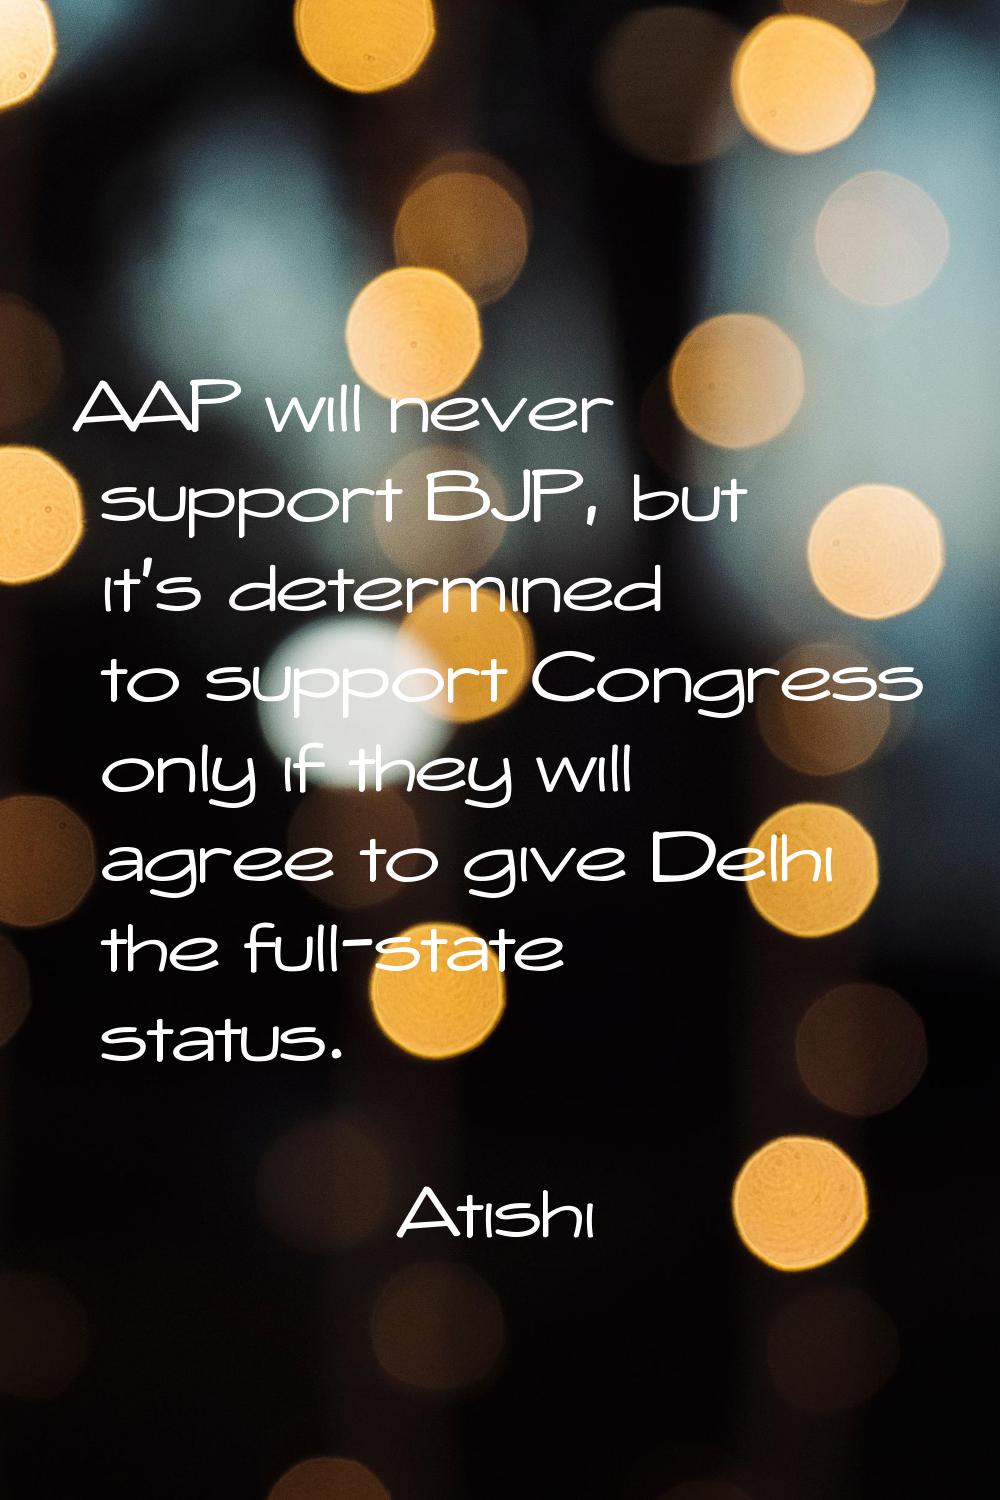 AAP will never support BJP, but it's determined to support Congress only if they will agree to give